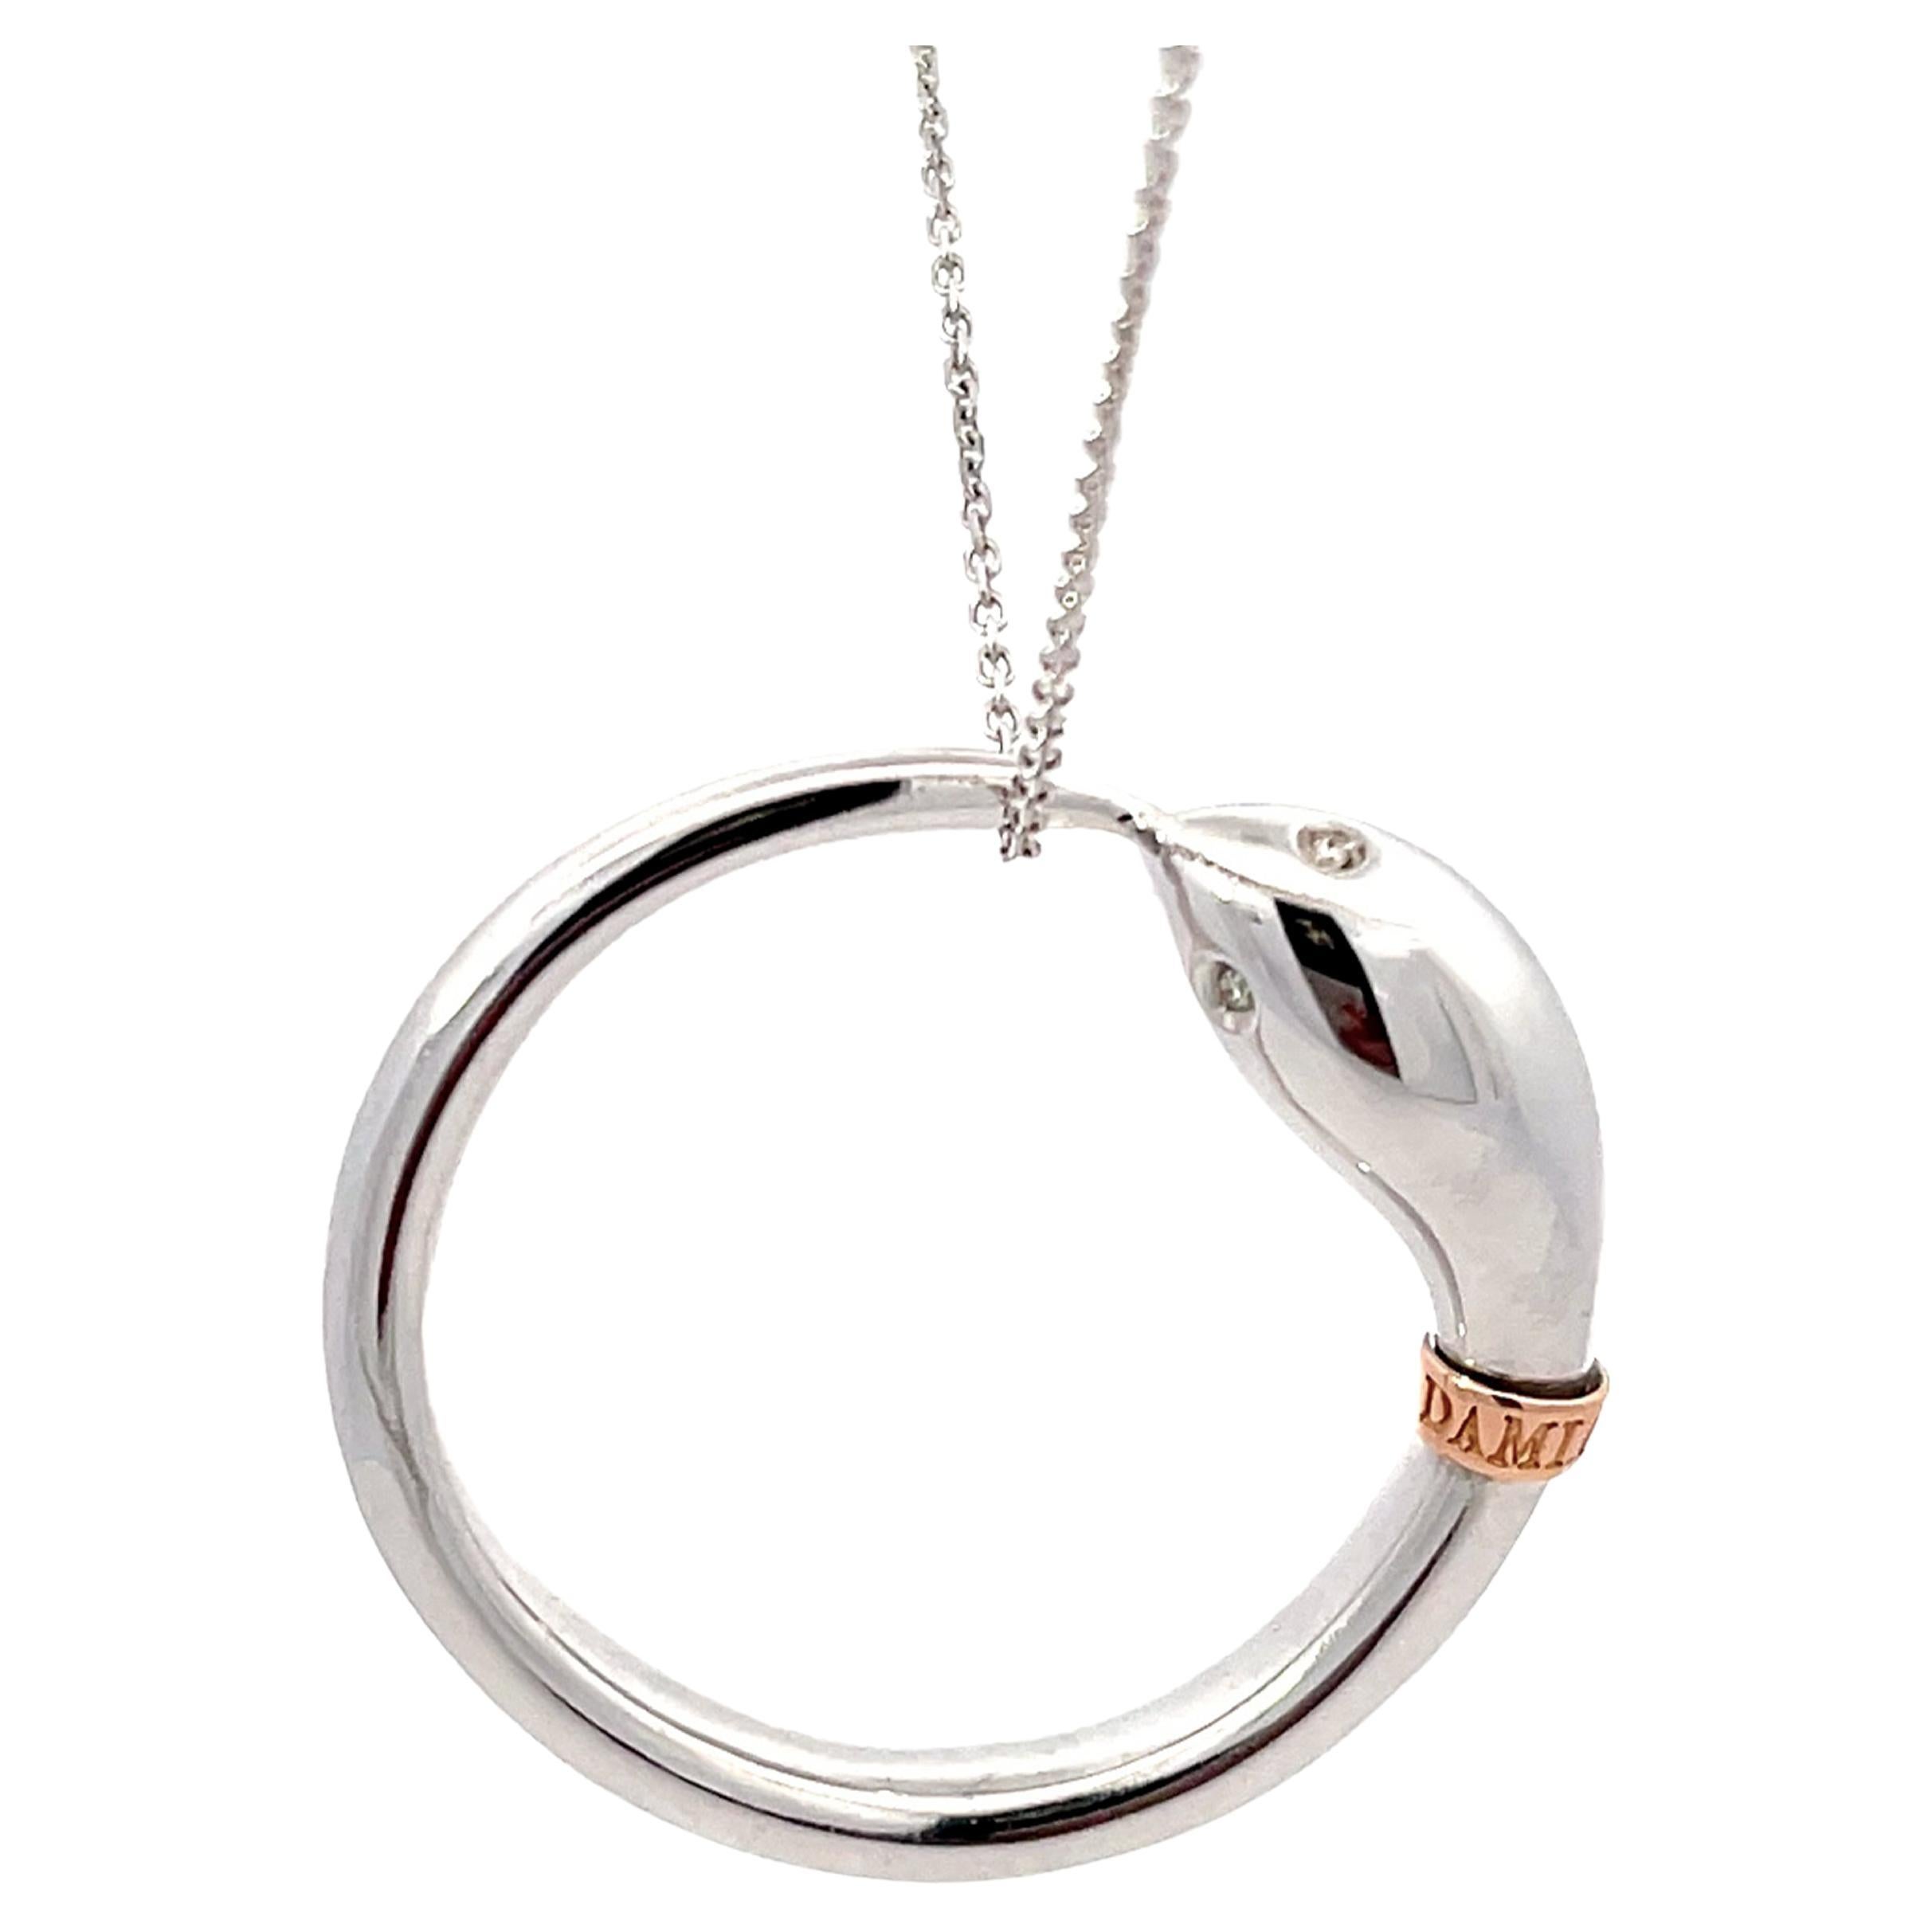 Damiani Infinito Snake Pendant Necklace in 18k White Gold For Sale